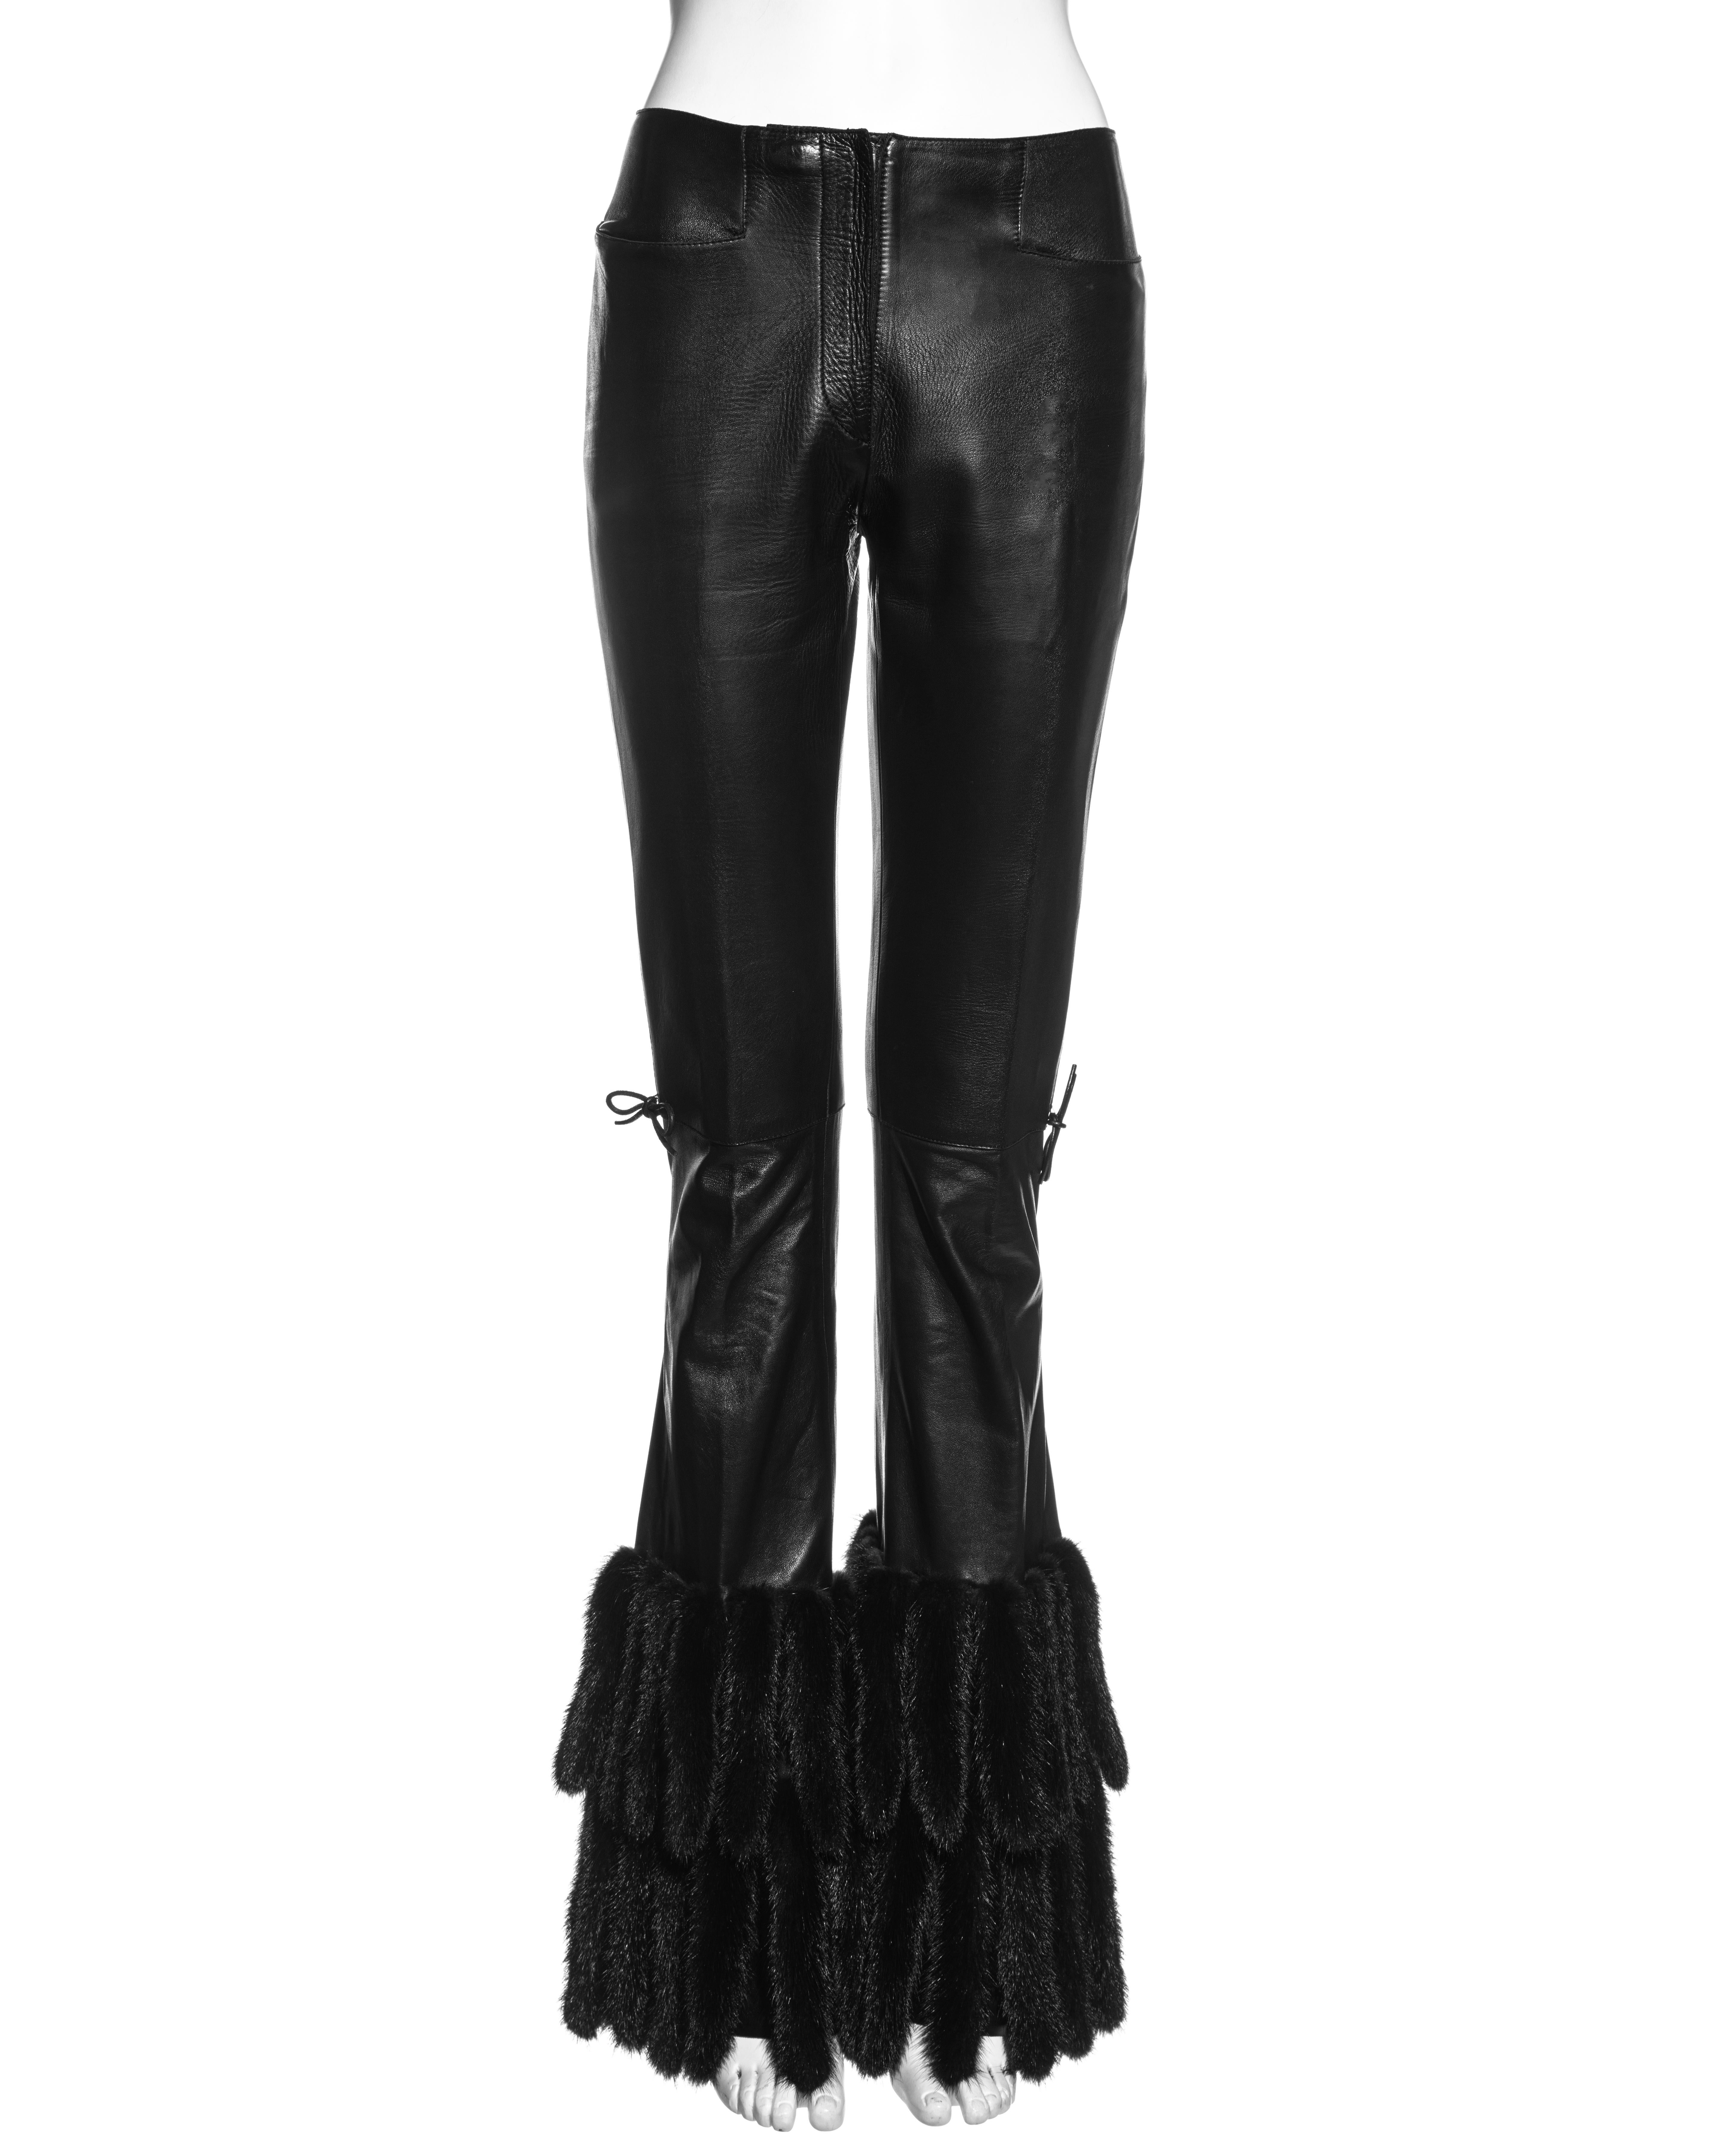 ▪ Gucci black leather flared pants 
▪ Designed by Tom Ford
▪ Dark brown mink fur tails at the hem
▪ Leather ribbon bow detail at both knees 
▪ IT 40 - FR 36 - UK 8 - US 4
▪ Fall-Winter 1999